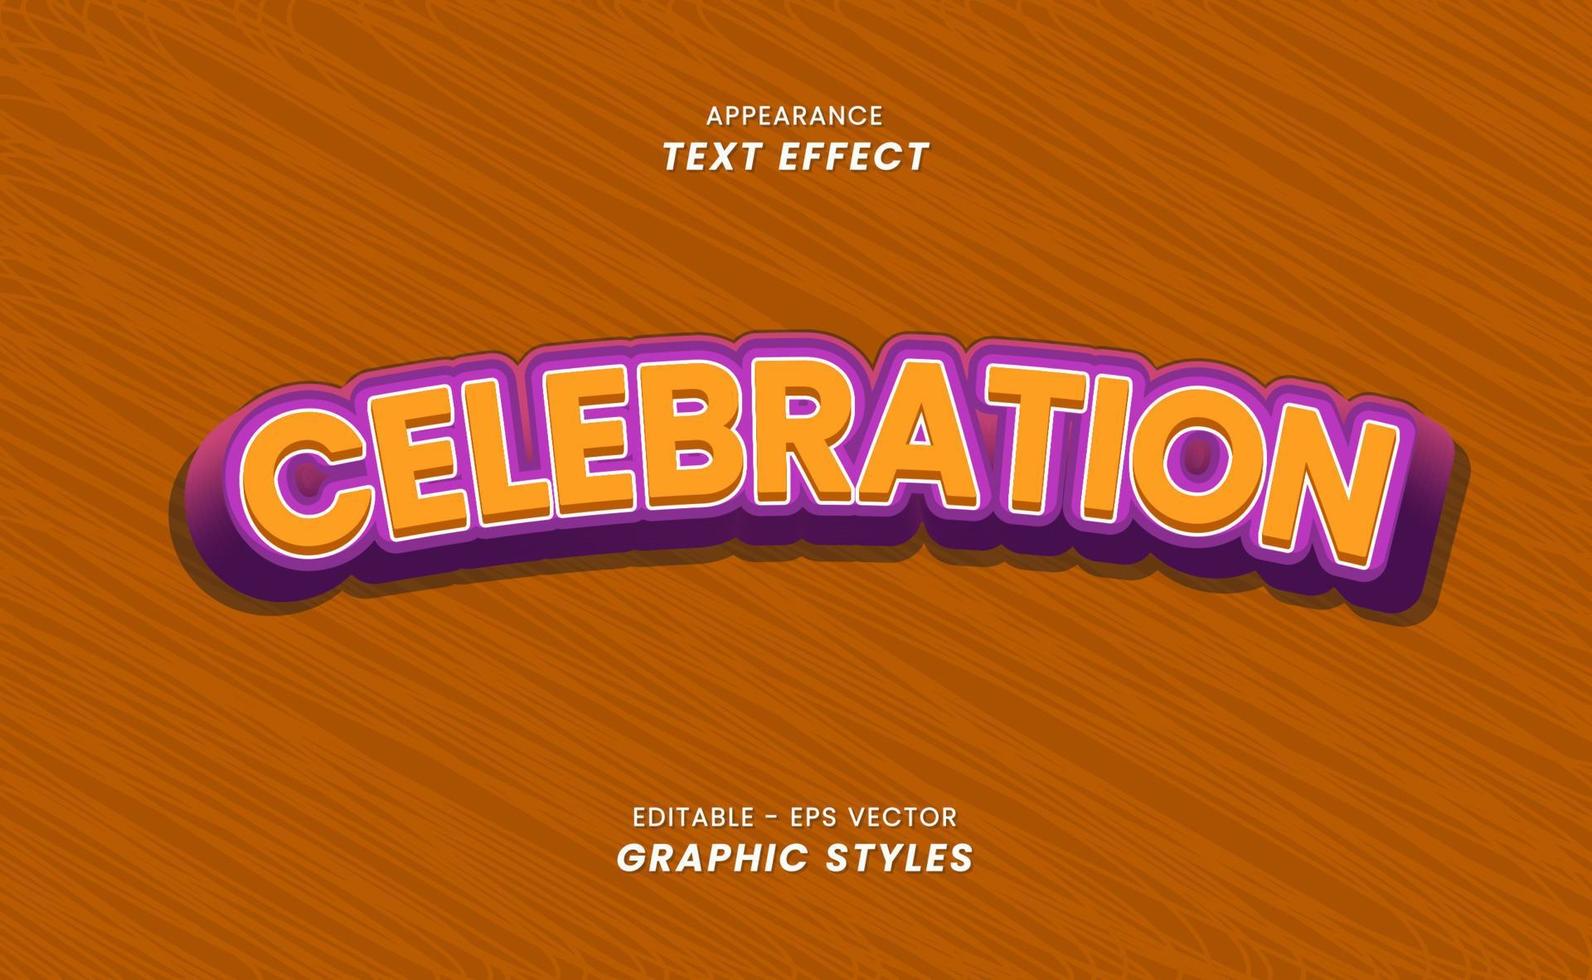 Appearance Text Effects - Editable Celebration Text. Graphic Styles vector